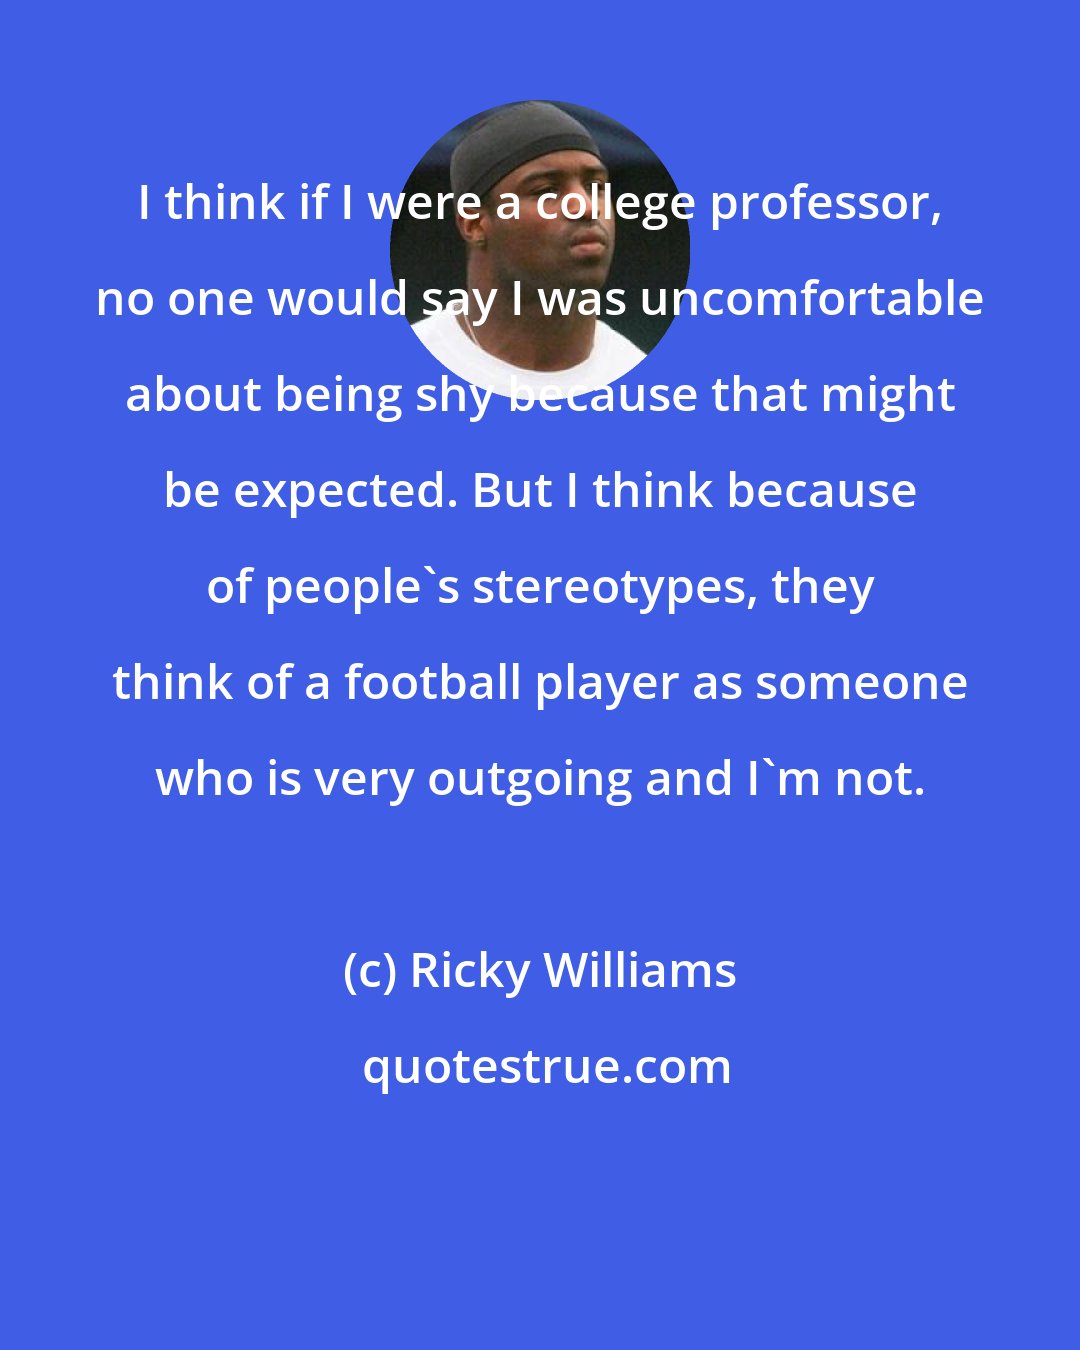 Ricky Williams: I think if I were a college professor, no one would say I was uncomfortable about being shy because that might be expected. But I think because of people's stereotypes, they think of a football player as someone who is very outgoing and I'm not.